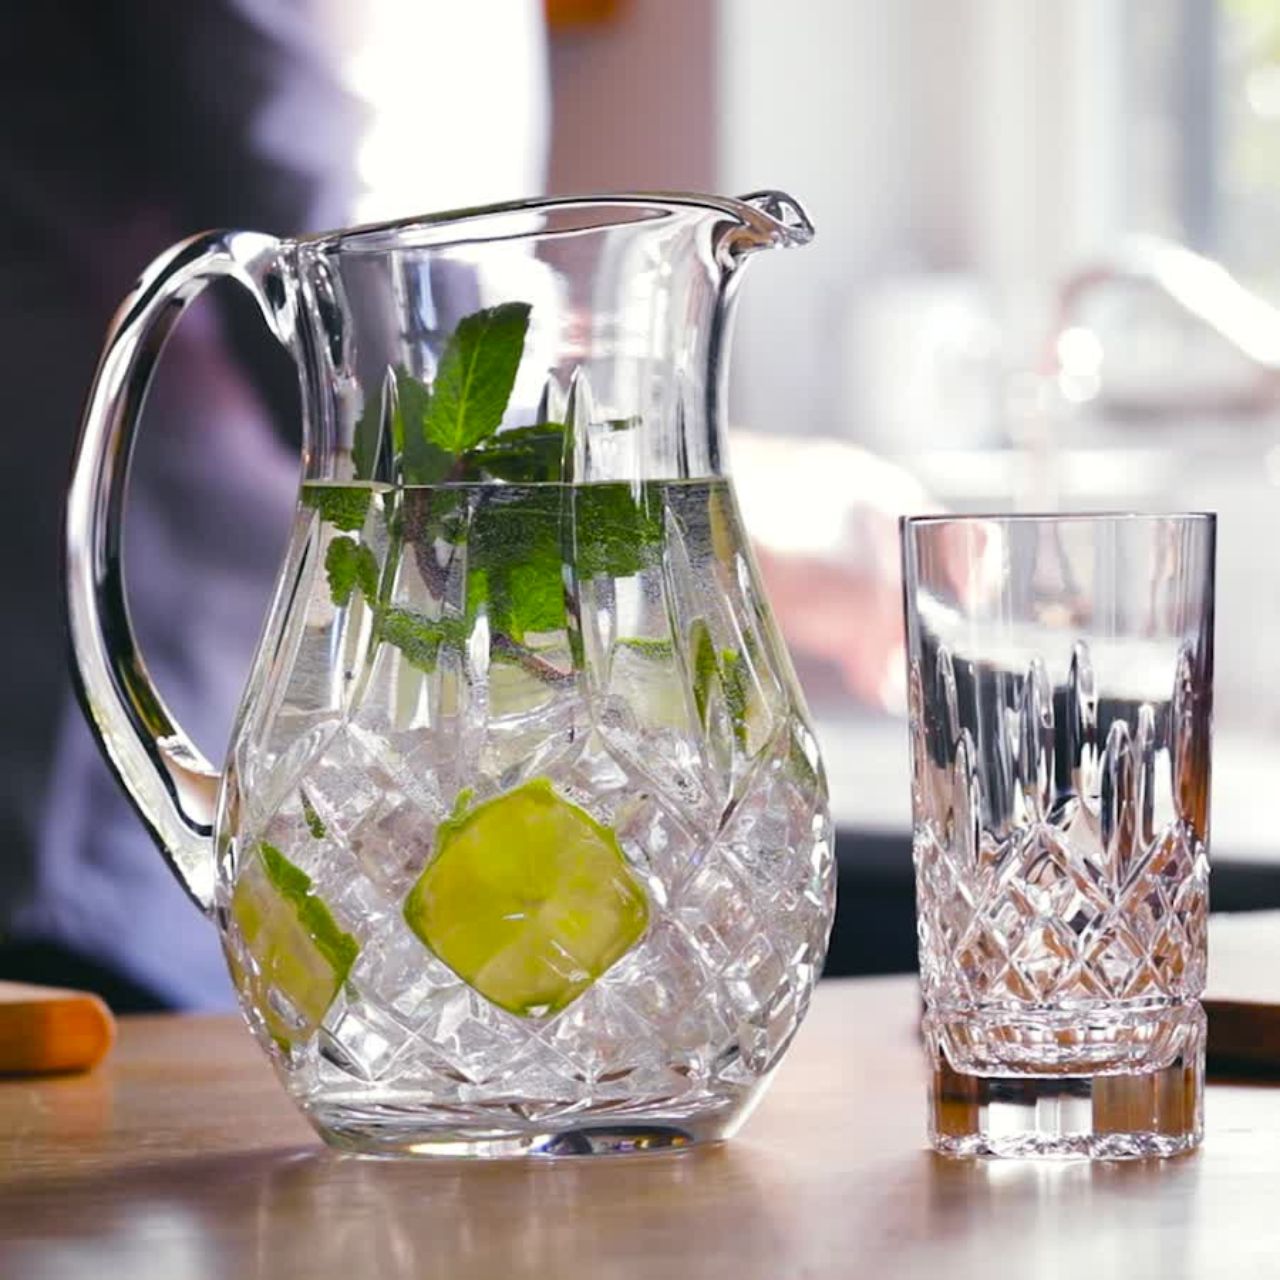 Waterford Lismore Pitcher  This elegant Lismore Pitcher brings luxury style to entertaining at home, as you confidently pour homemade lemonade, iced water or a refreshing fruit punch for welcome guests. 